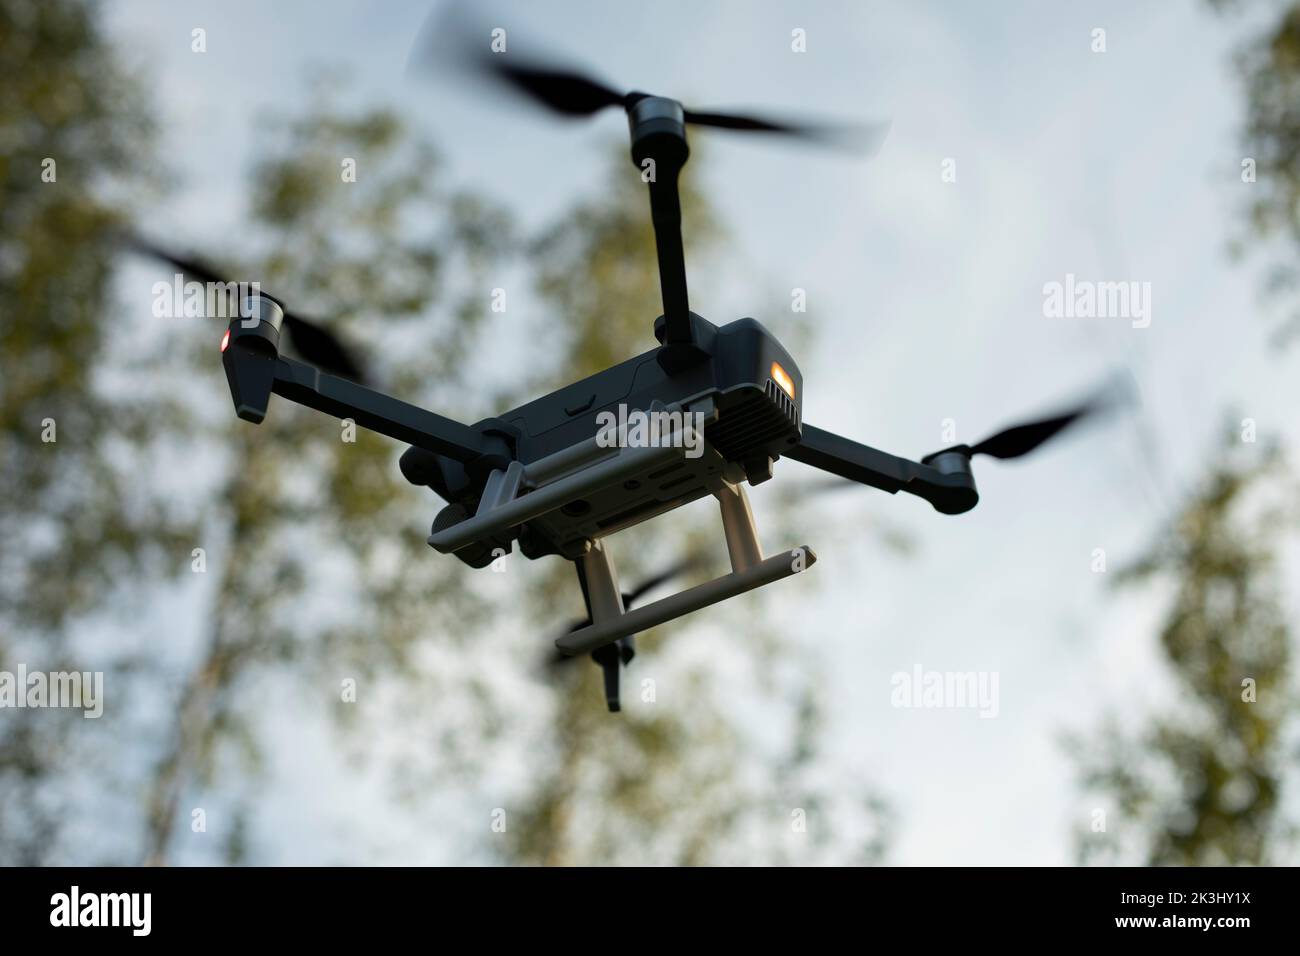 Drone flies low. Drone flight in sky. Technology of flight and shooting from sky. Device with propeller. Combat drone. Stock Photo